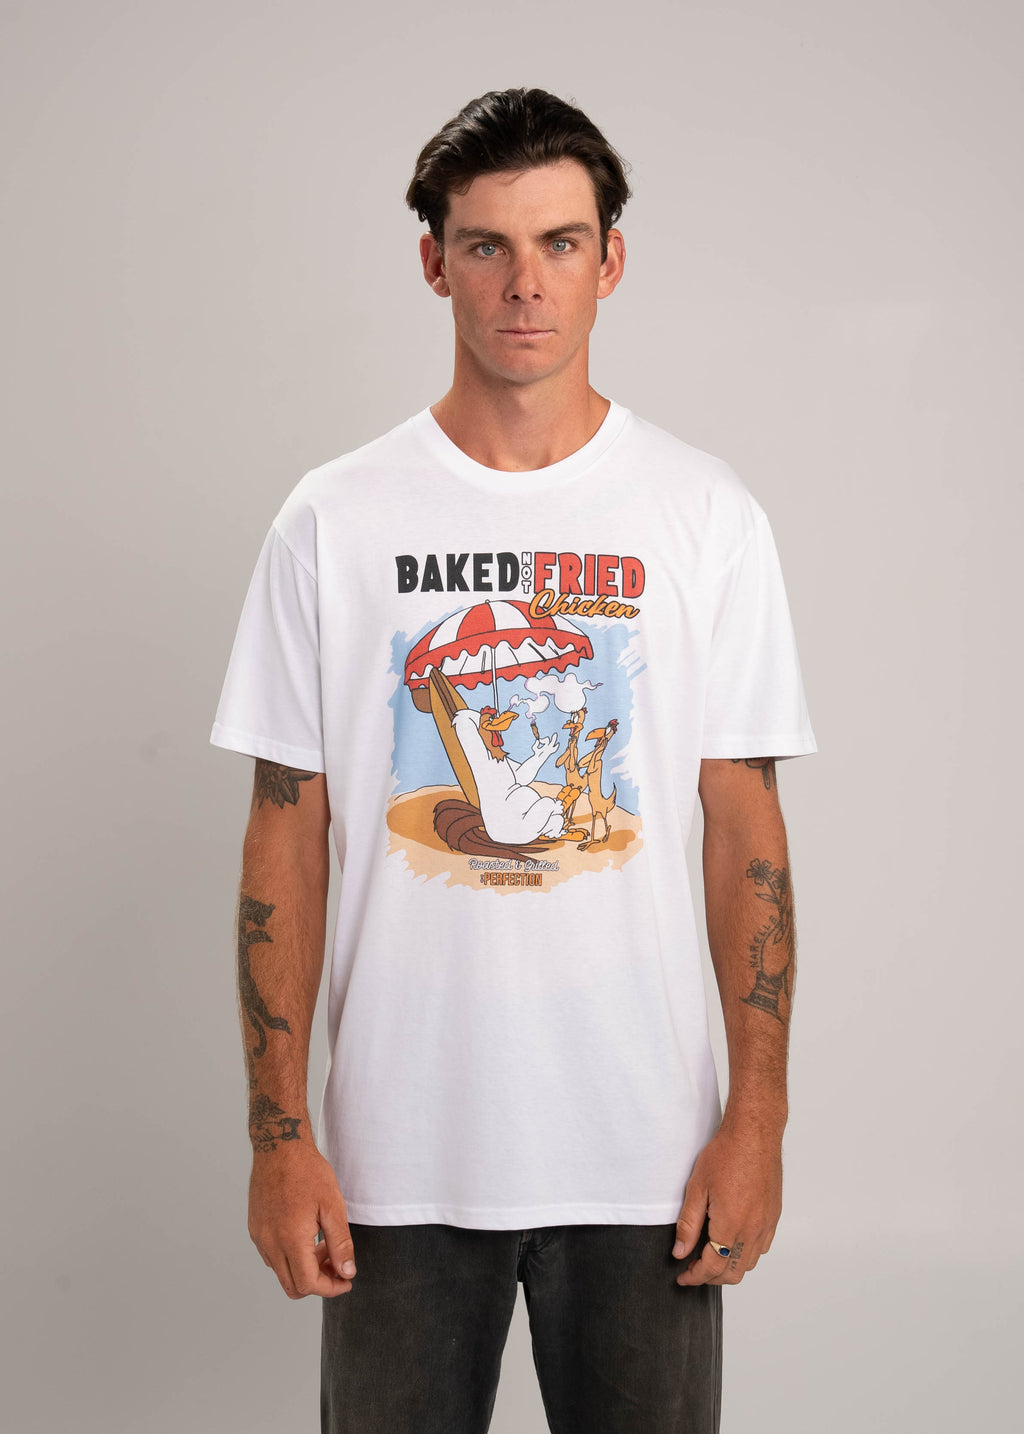 Dr.Moose Byron Bay Baked Not Fried T-Shirt